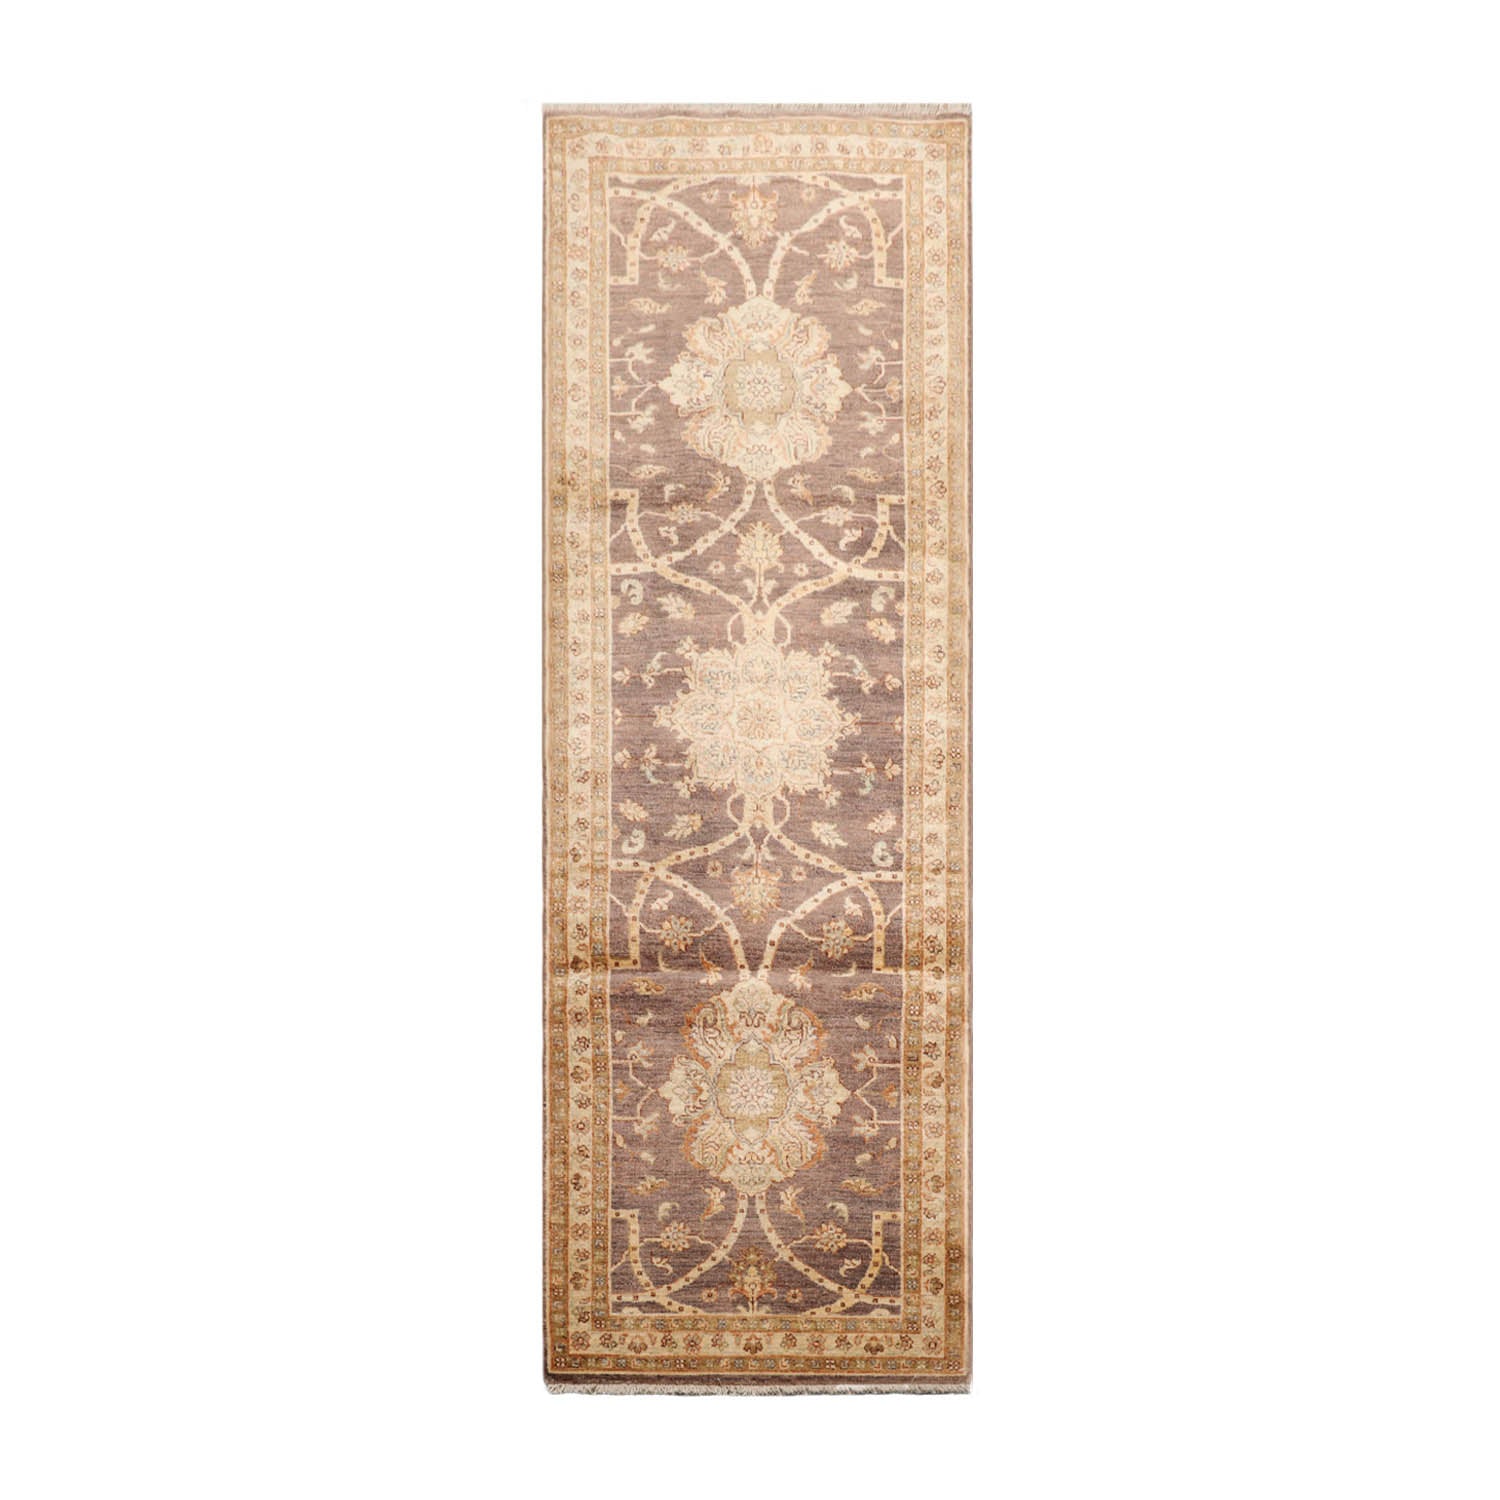 Faezah Runner Hand Knotted 100% Wool Peshawar Traditional Oriental Area Rug Gray, Beige Color